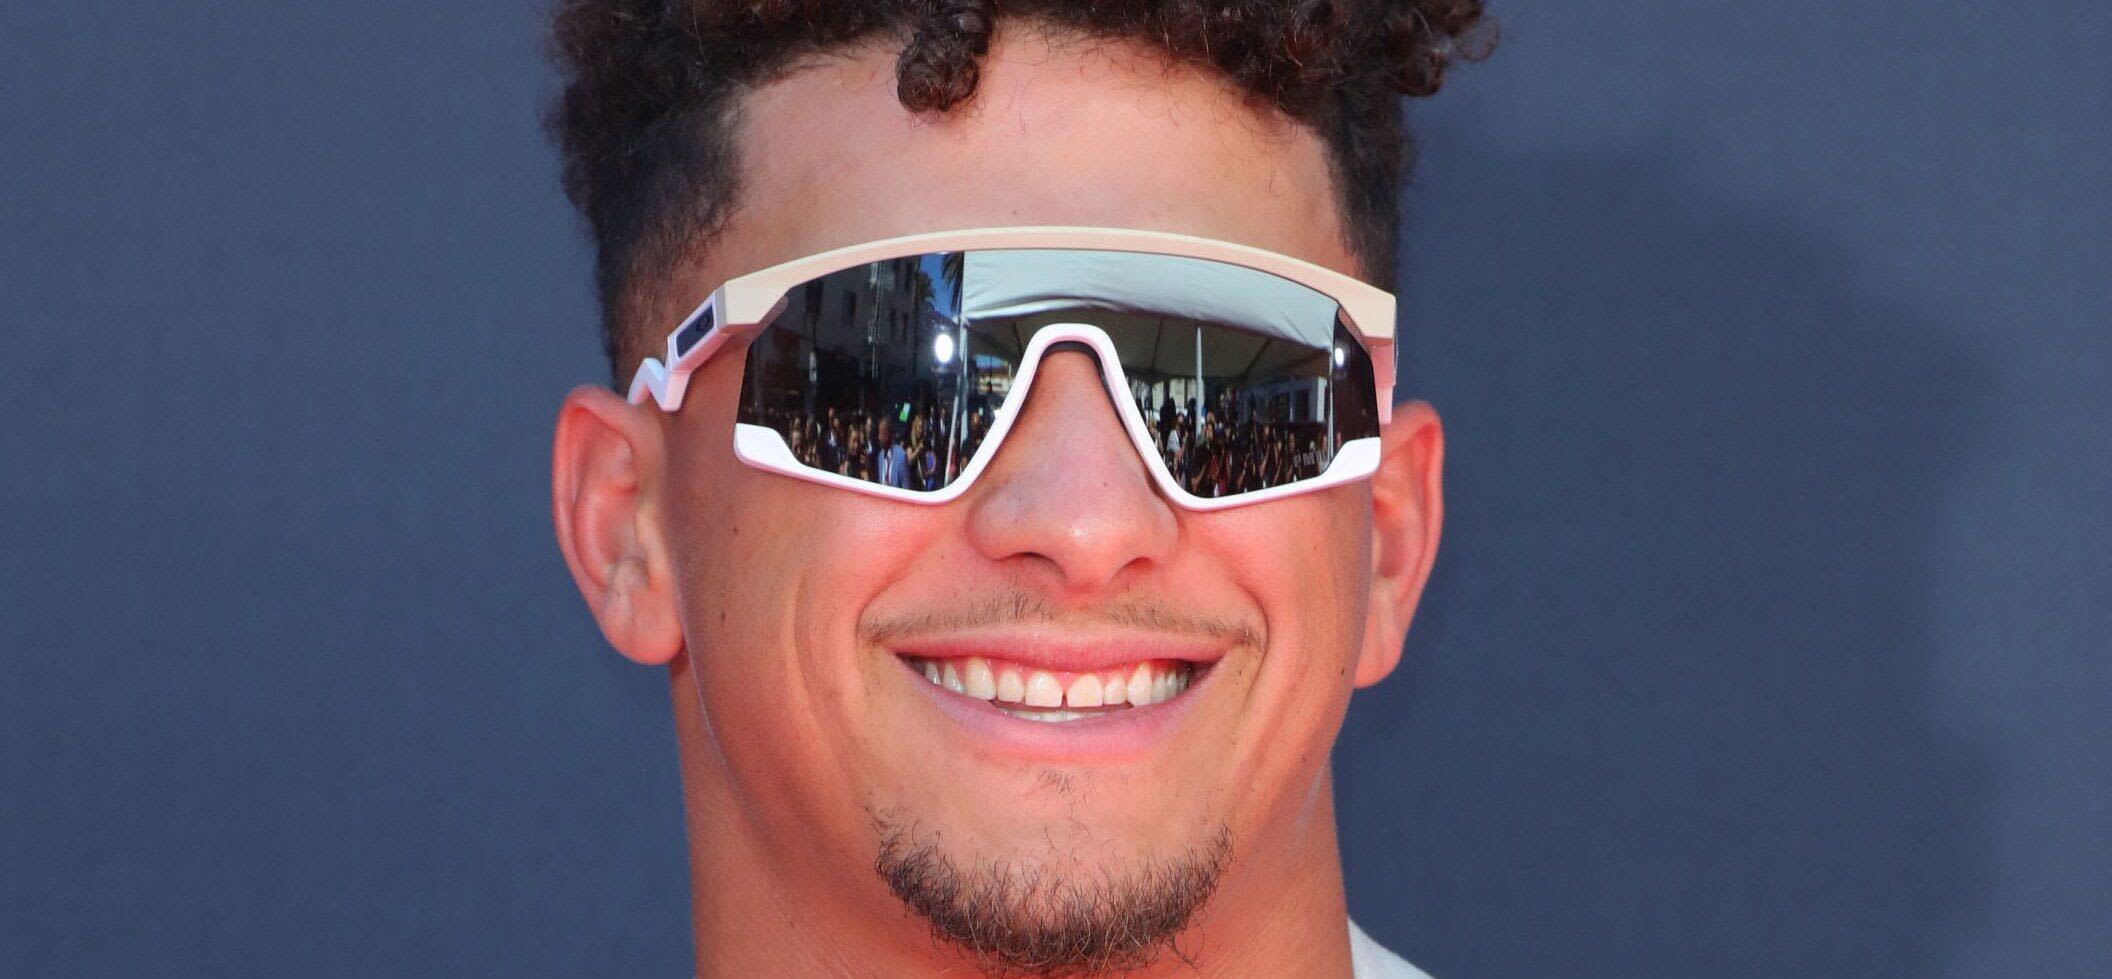 Patrick Mahomes Recently Addressed Comments Made About His Body